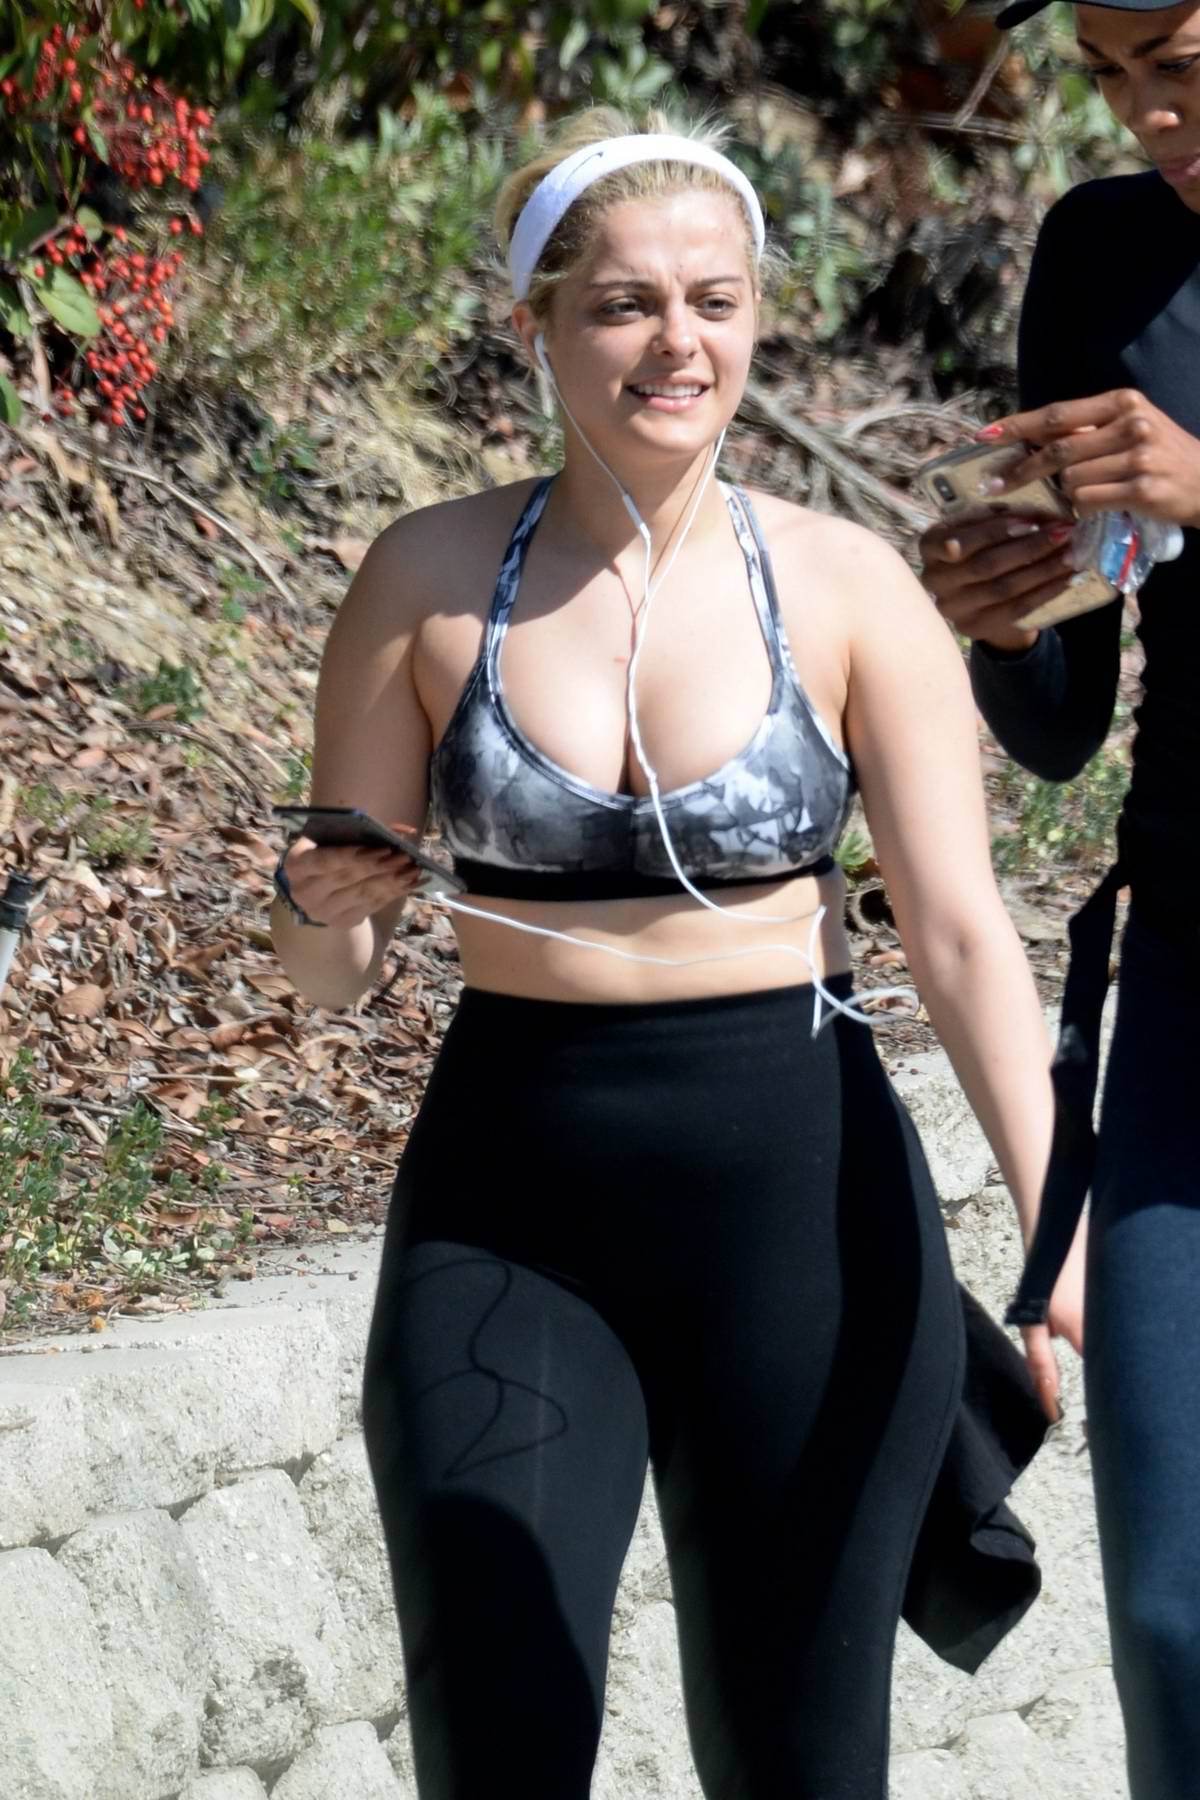 bebe rexha seen wearing sports bra and leggings during a workout